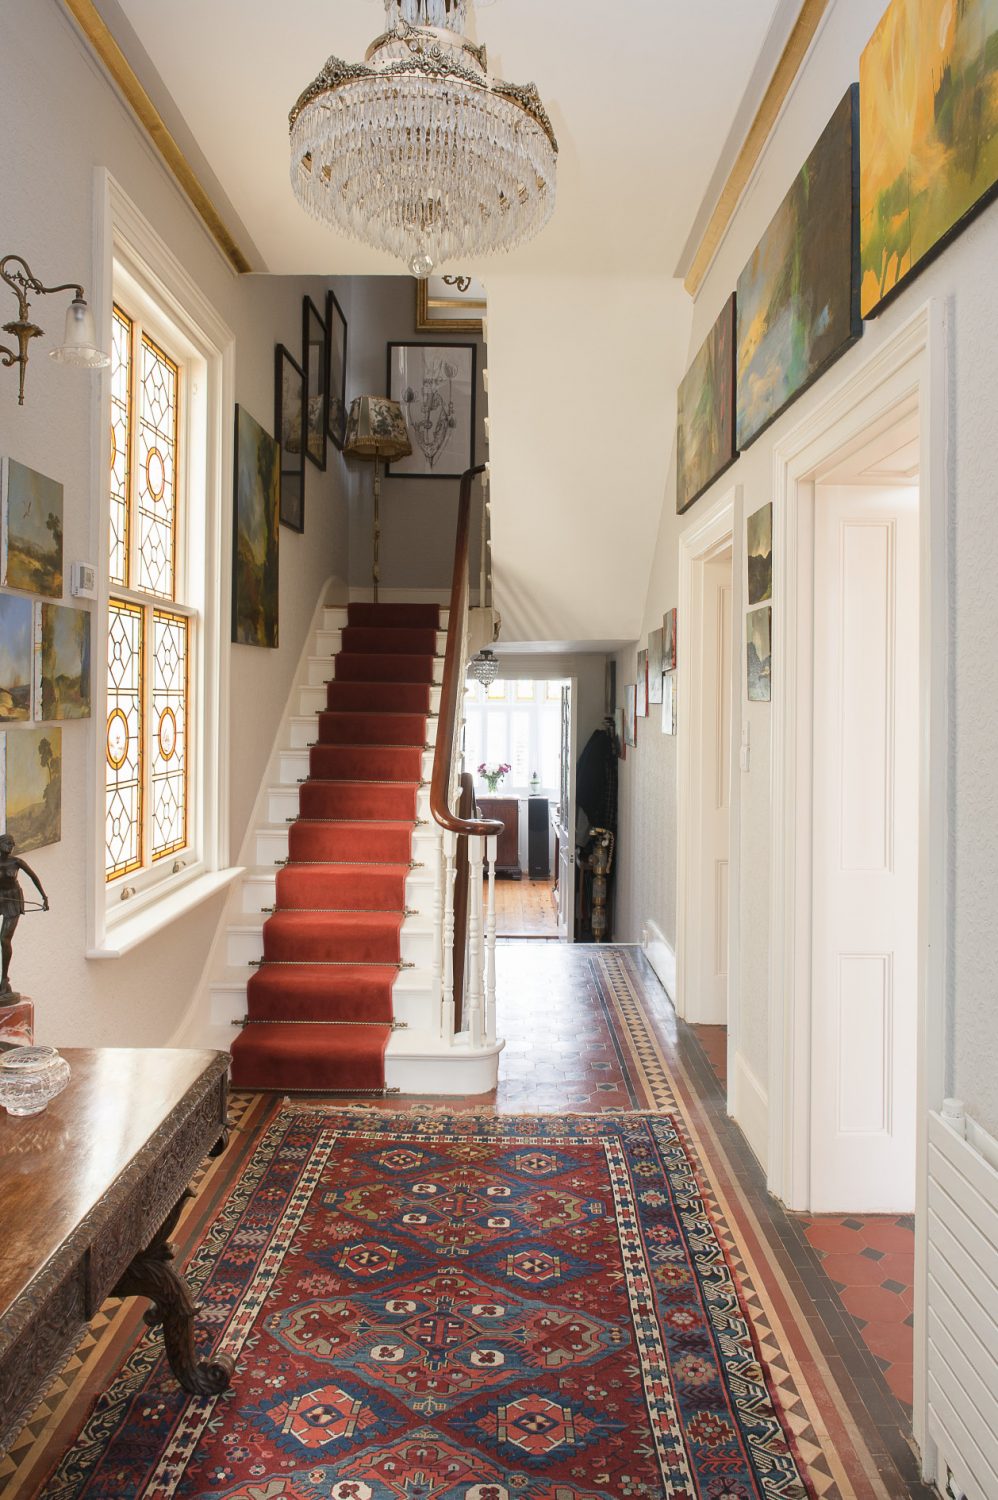 The hallway features a glowing amber stained glass window that Ken sourced in London to replace the original. Doors at the end of the hallway lead into the house’s own private chapel